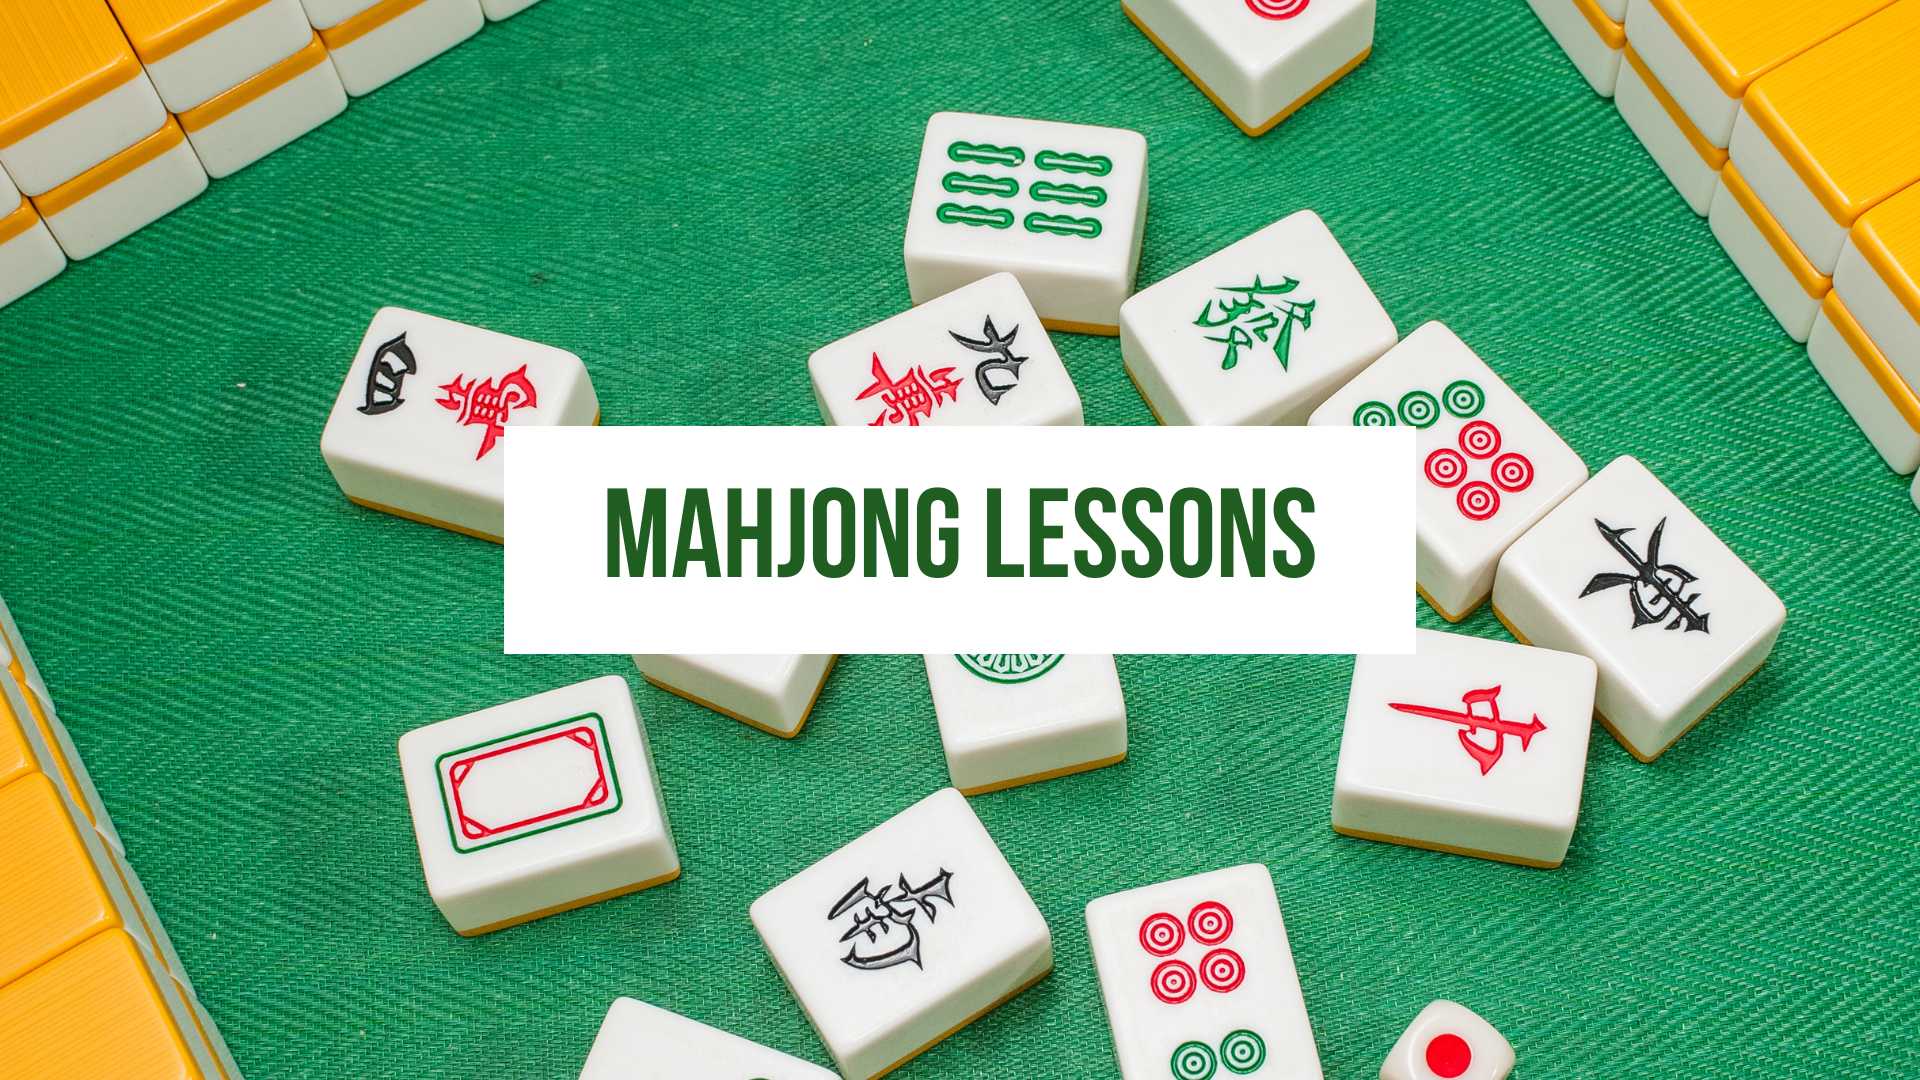 Griffin Club Los Angeles - Event - Mahjong Lessons